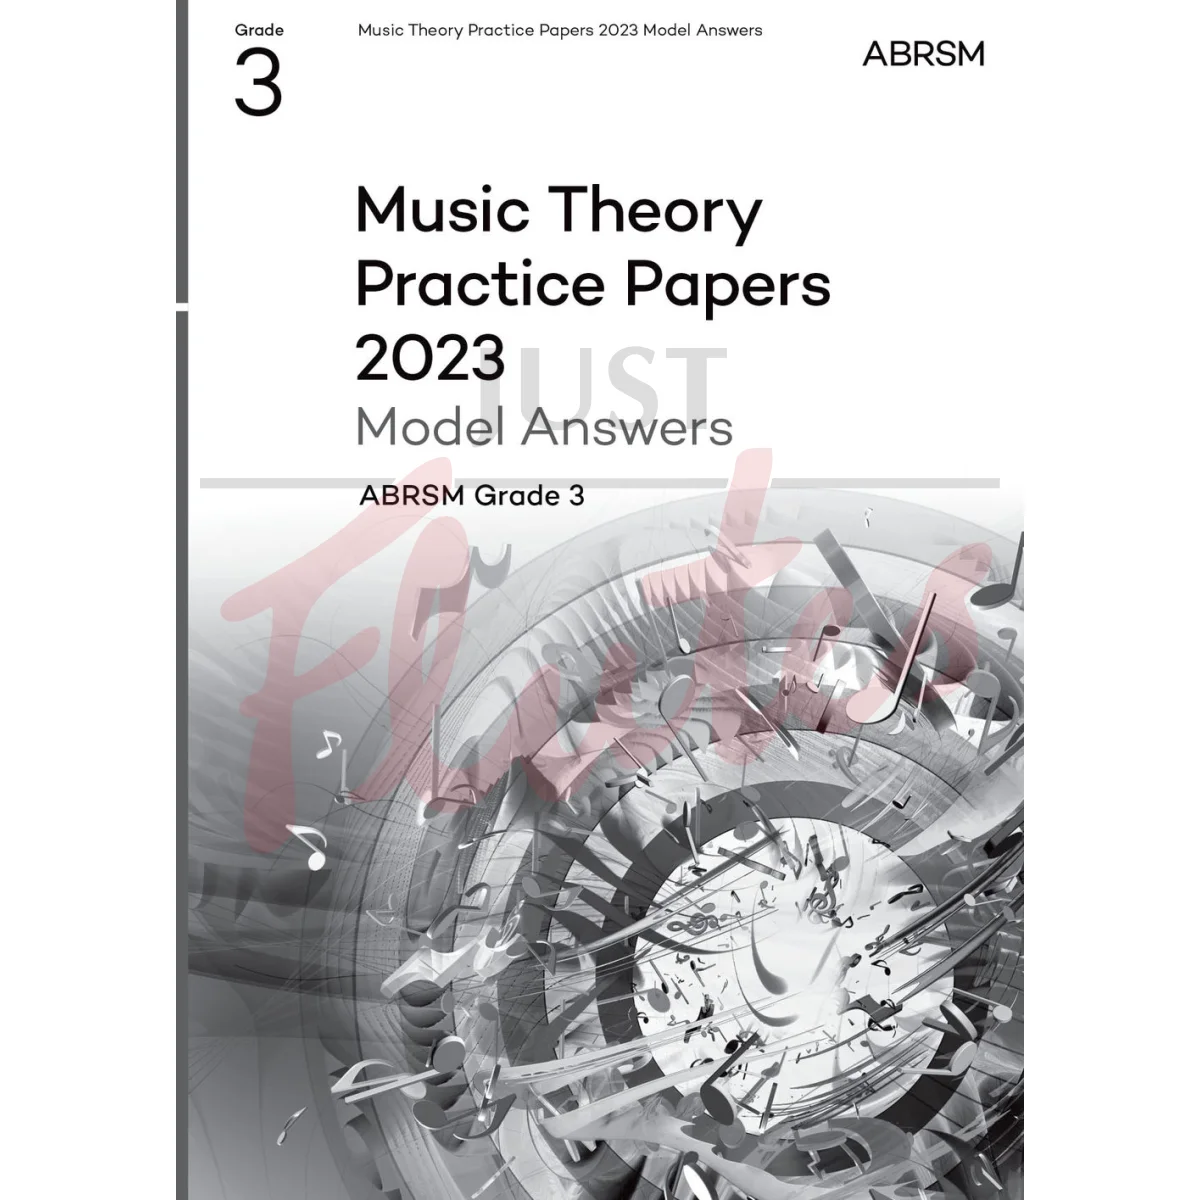 Music Theory Practice Papers 2023 Grade 3 - Model Answers